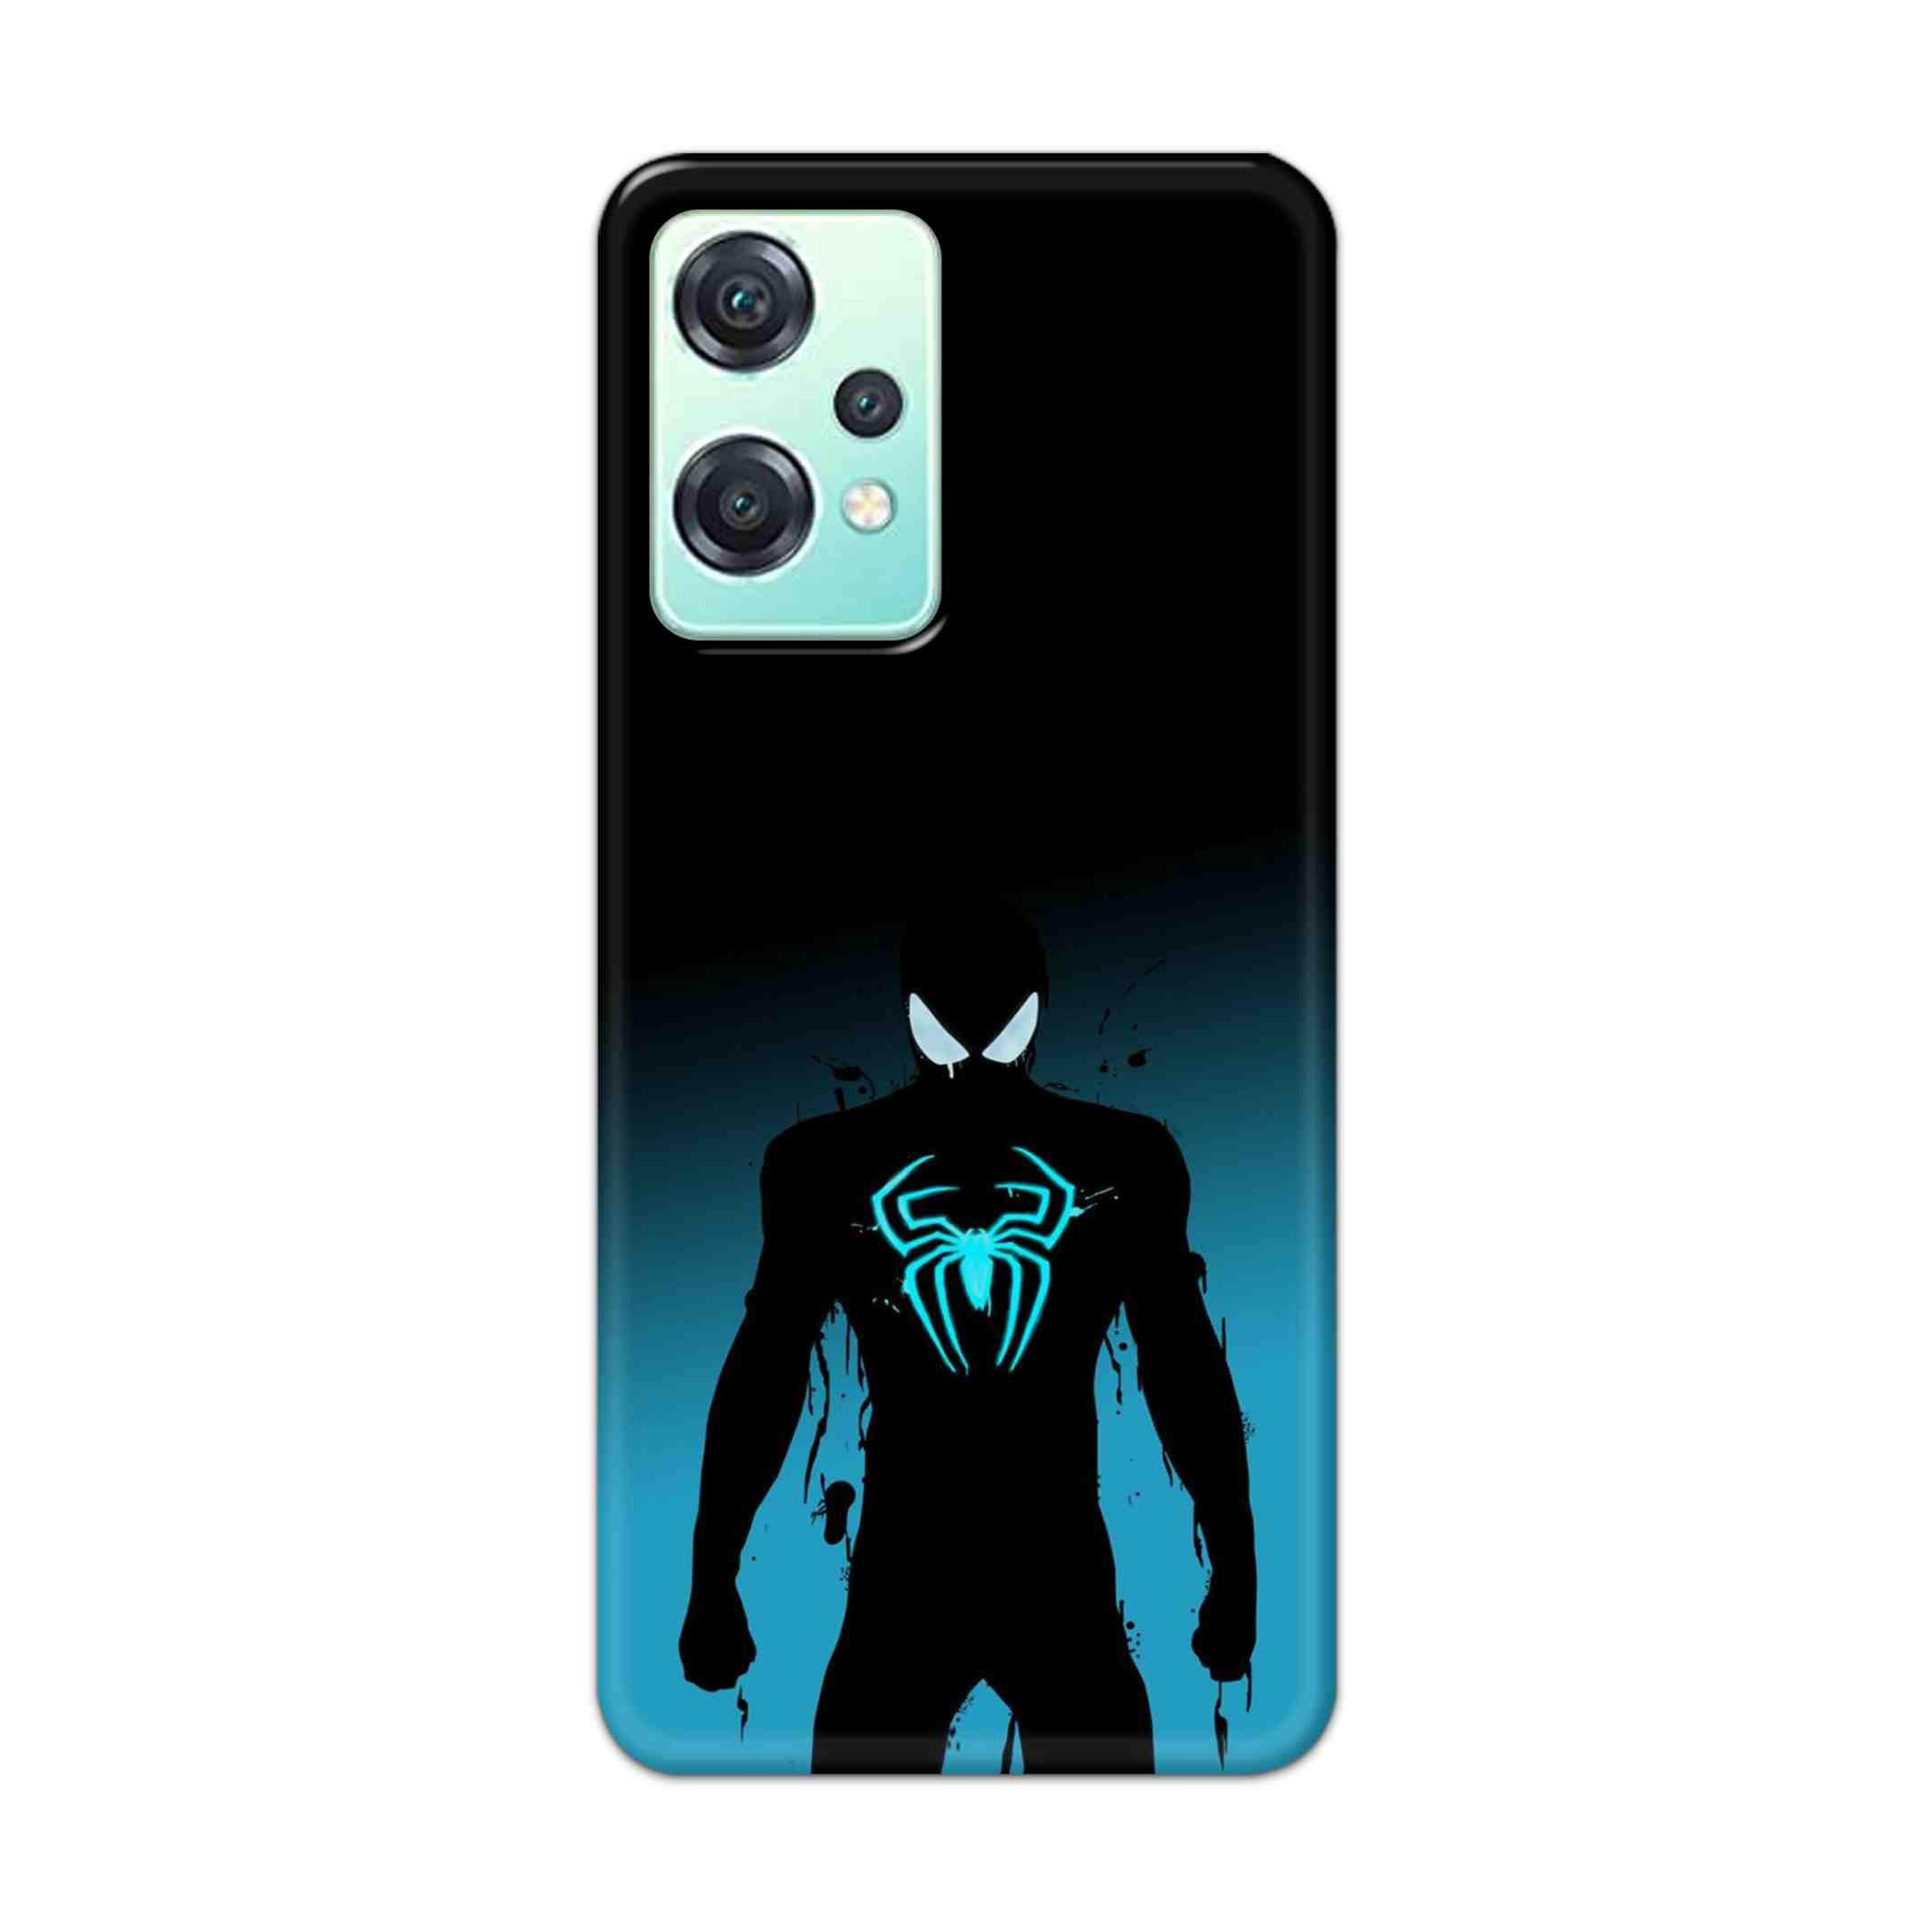 Buy Neon Spiderman Hard Back Mobile Phone Case Cover For OnePlus Nord CE 2 Lite 5G Online